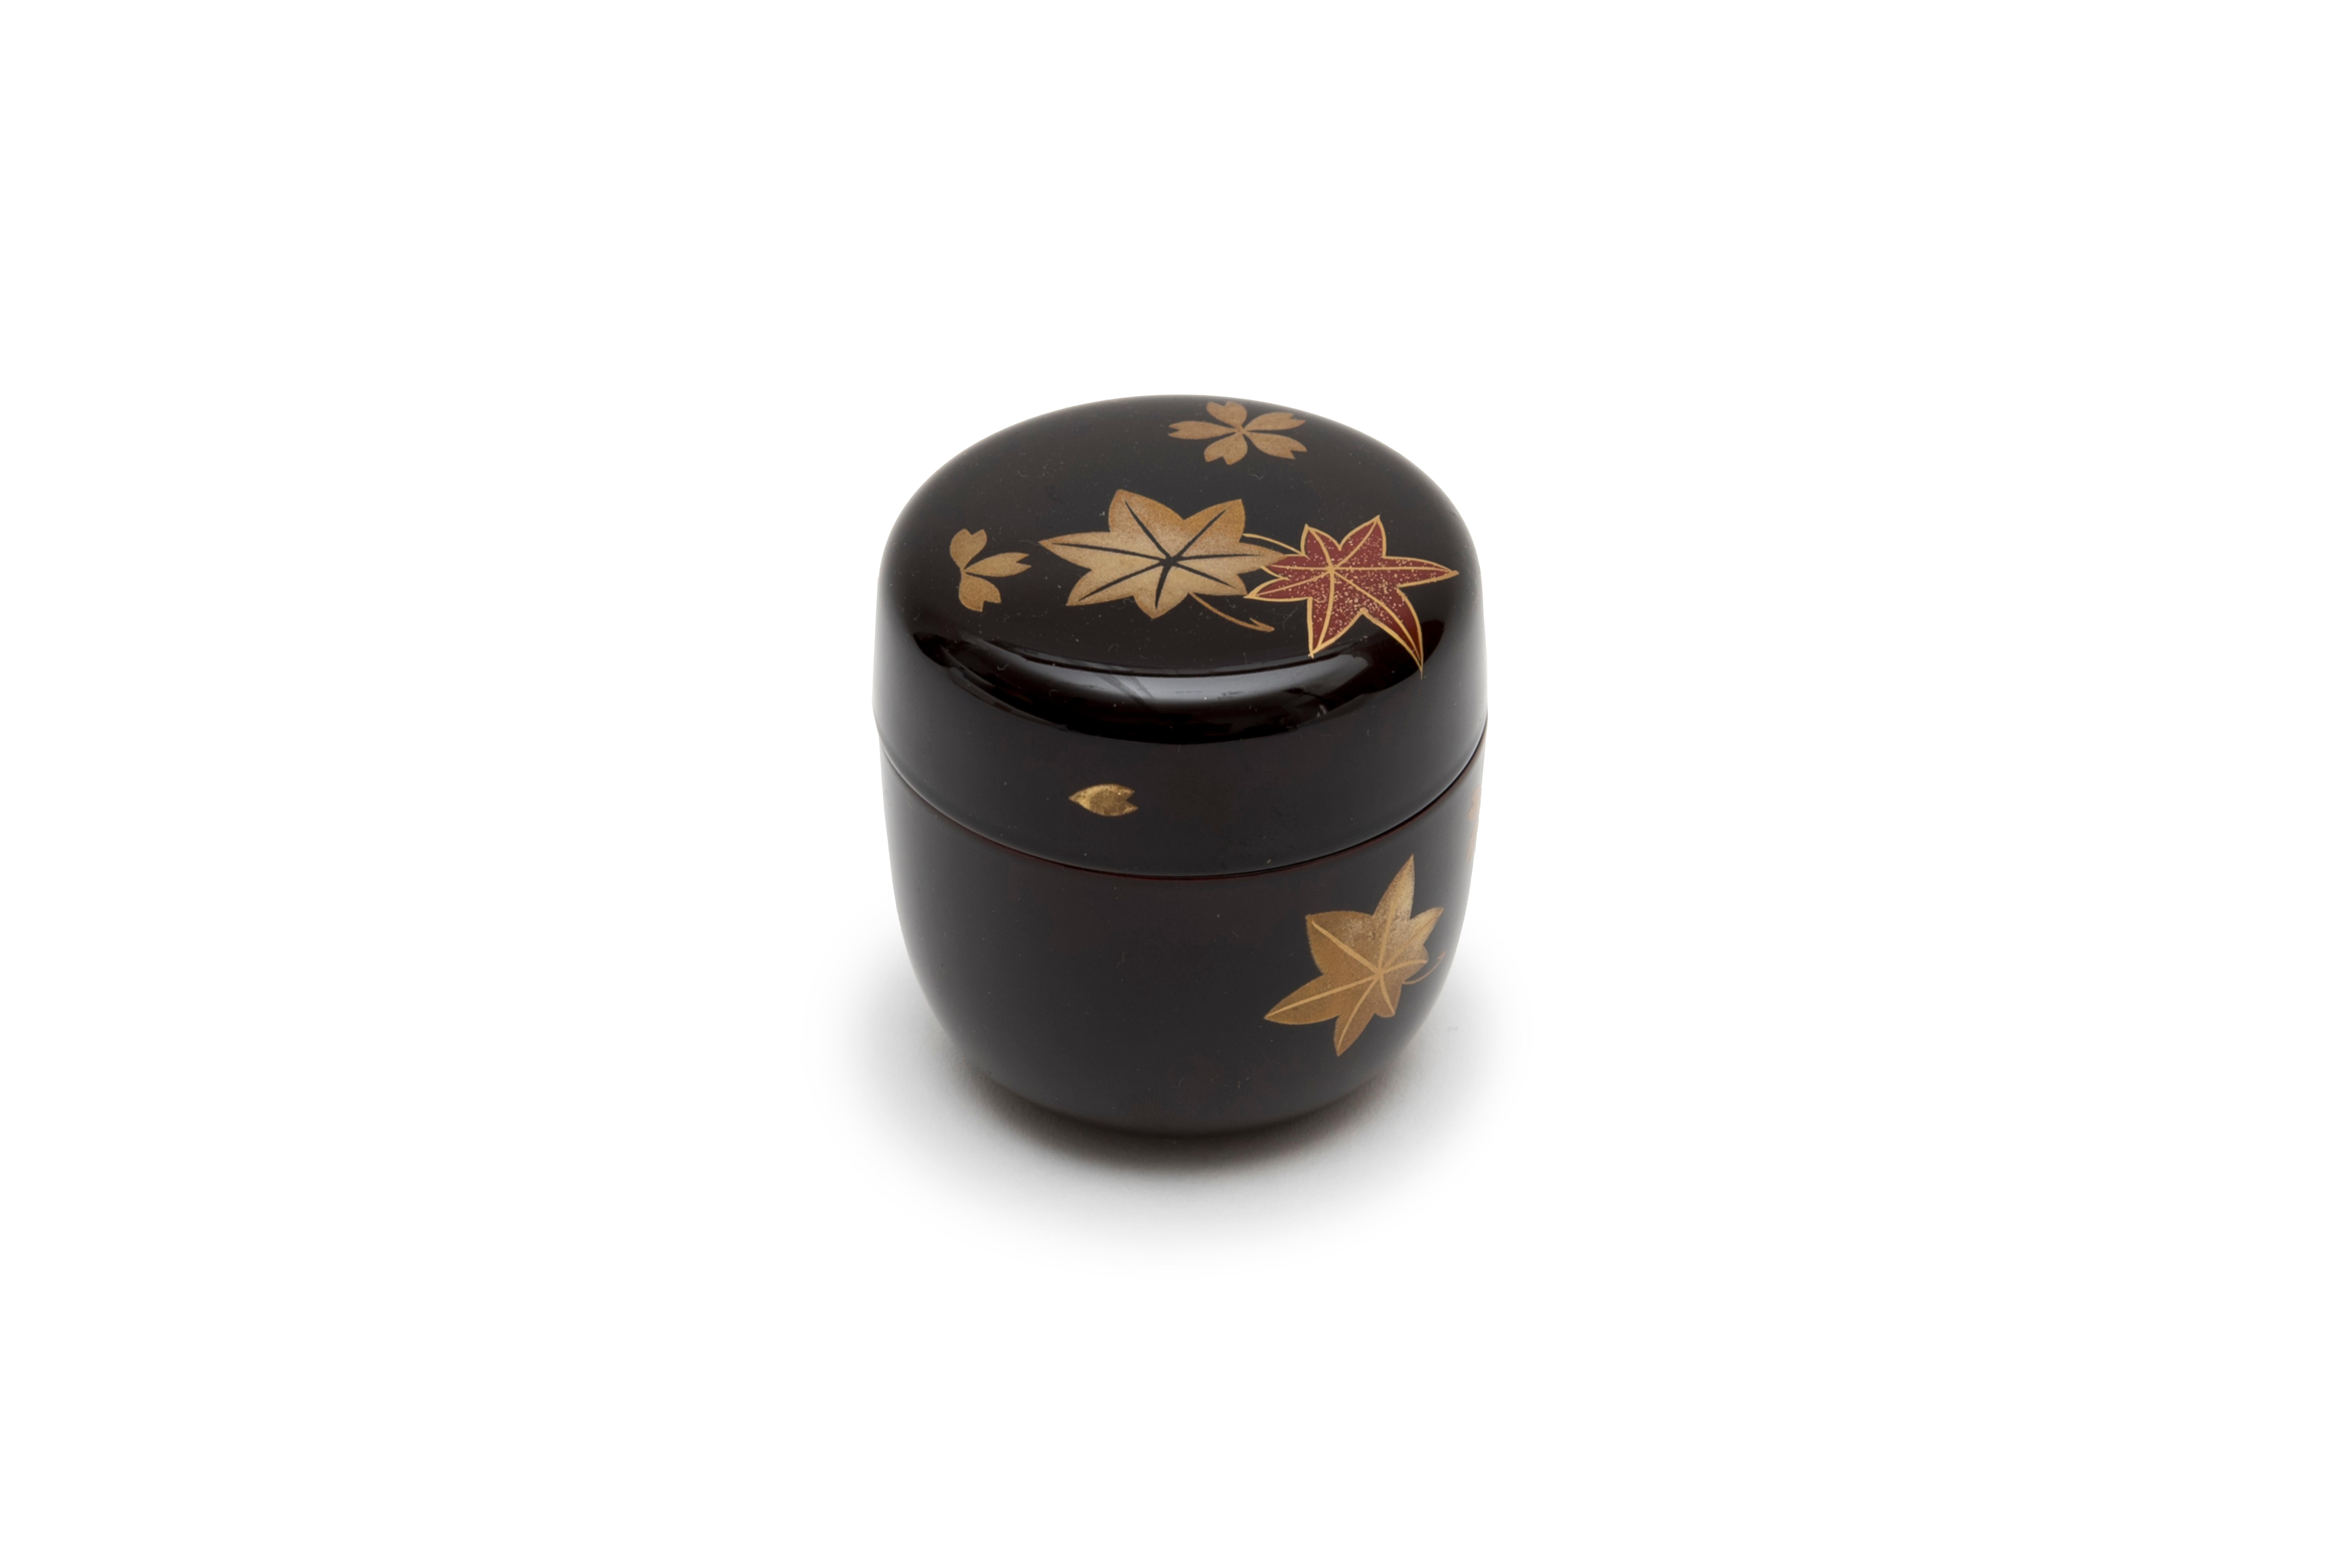 Natsume in dark red lacquer, decorated with autumn leaves and cherry blossoms in hiramaki-e and nashiji. Interior in black lacquer.
Maple leaves (Momiji) are celebrated in literature for their beauty. Cherry blossoms (sakura) are symbols of renewal